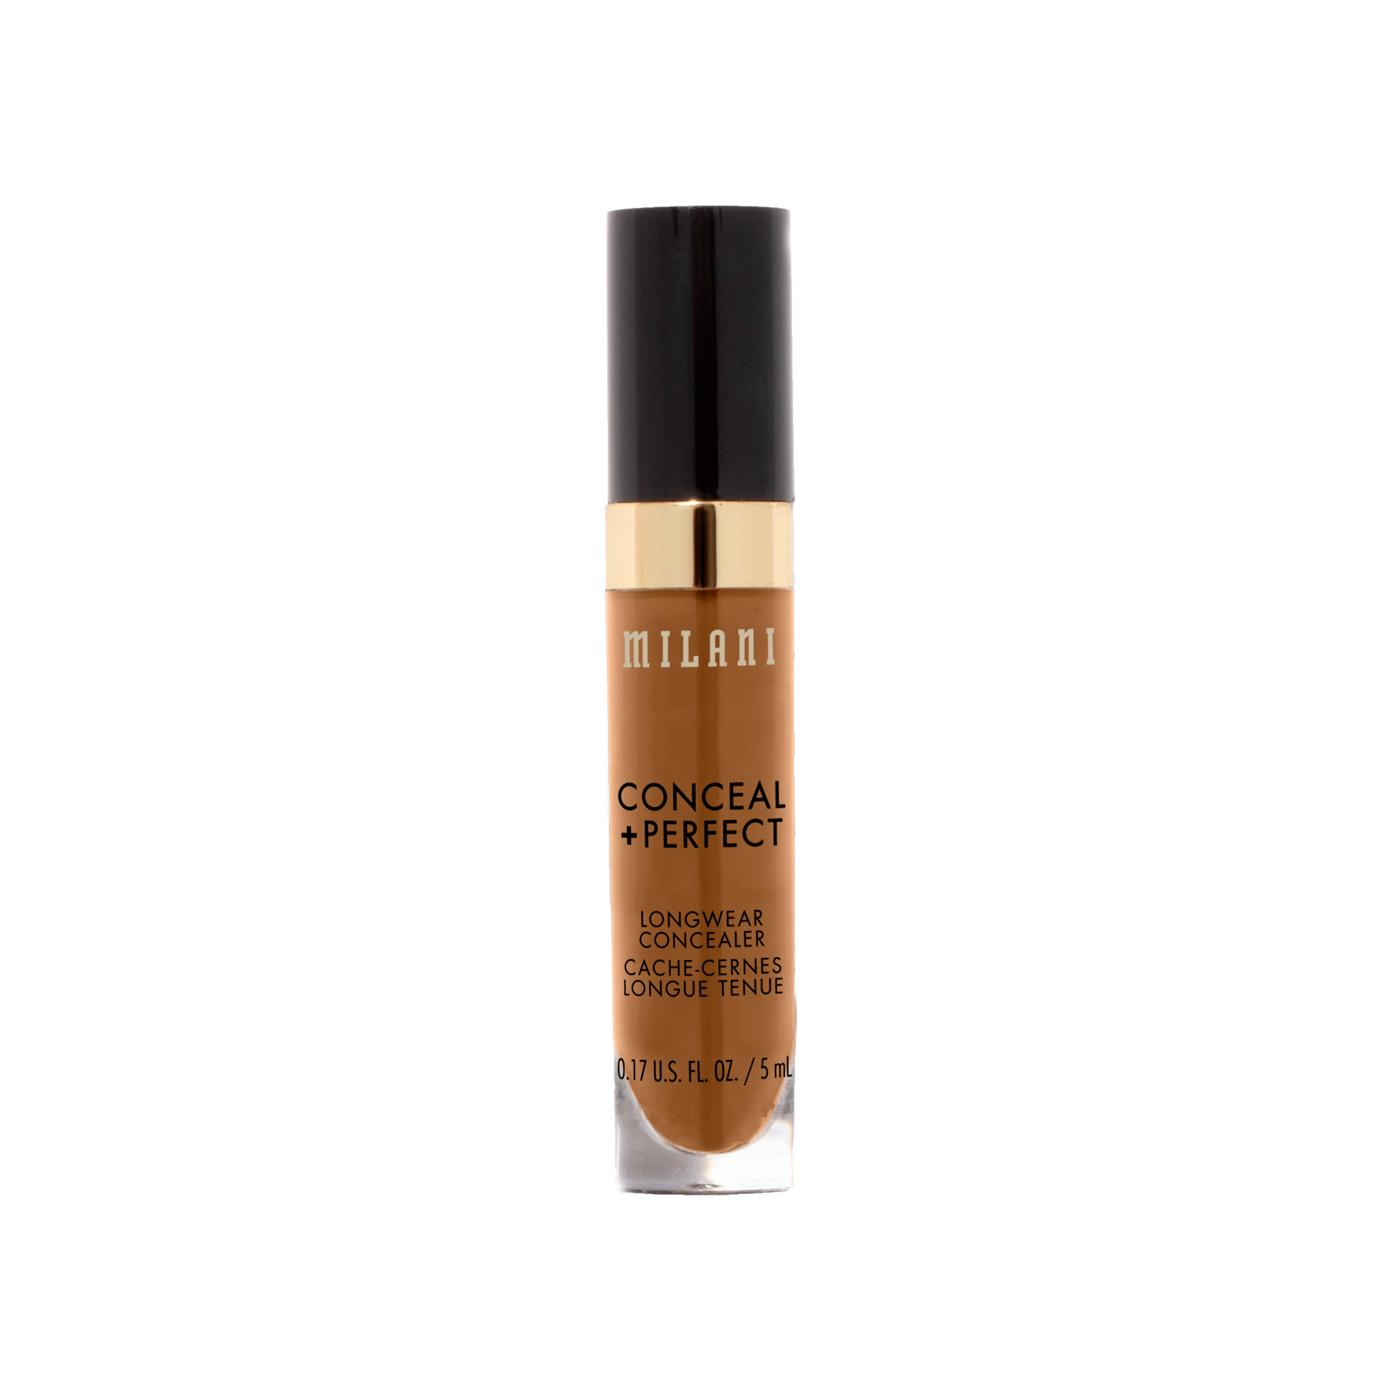 Milani Conceal +Perfect Longwear Concealer - Warm Almond; image 1 of 7